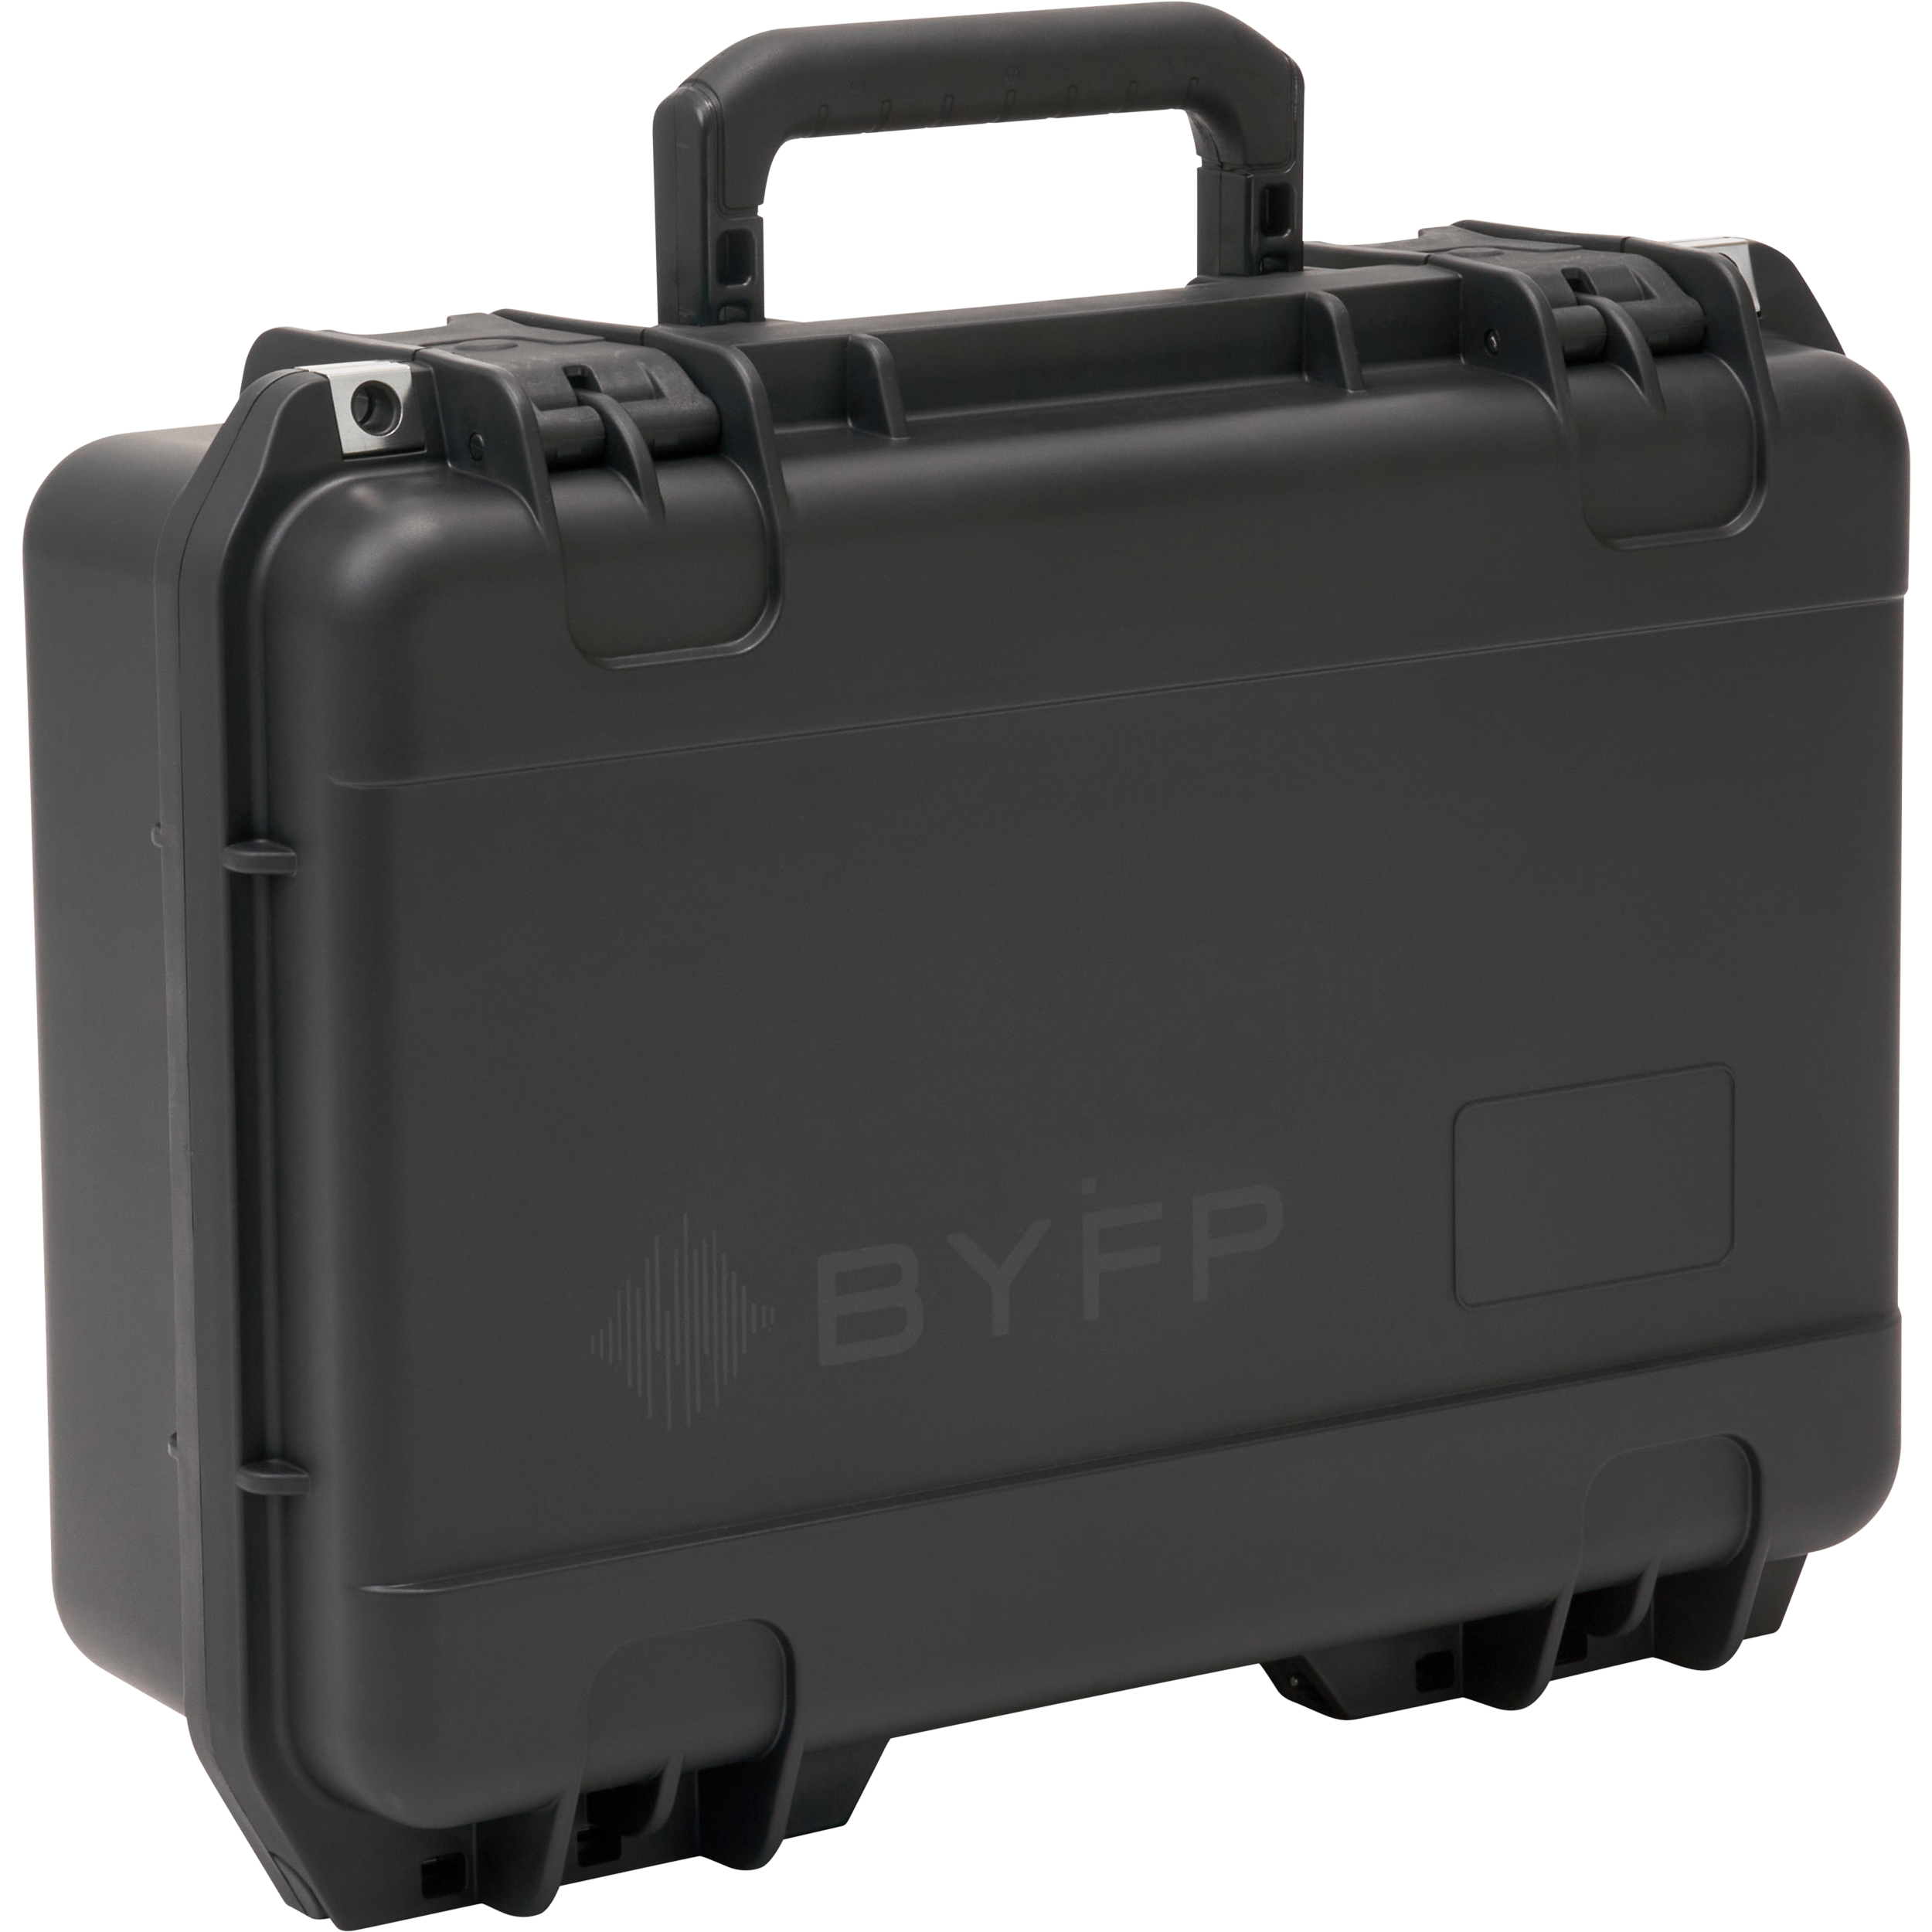 BYFP ipCase for Roland V-02HD MKII